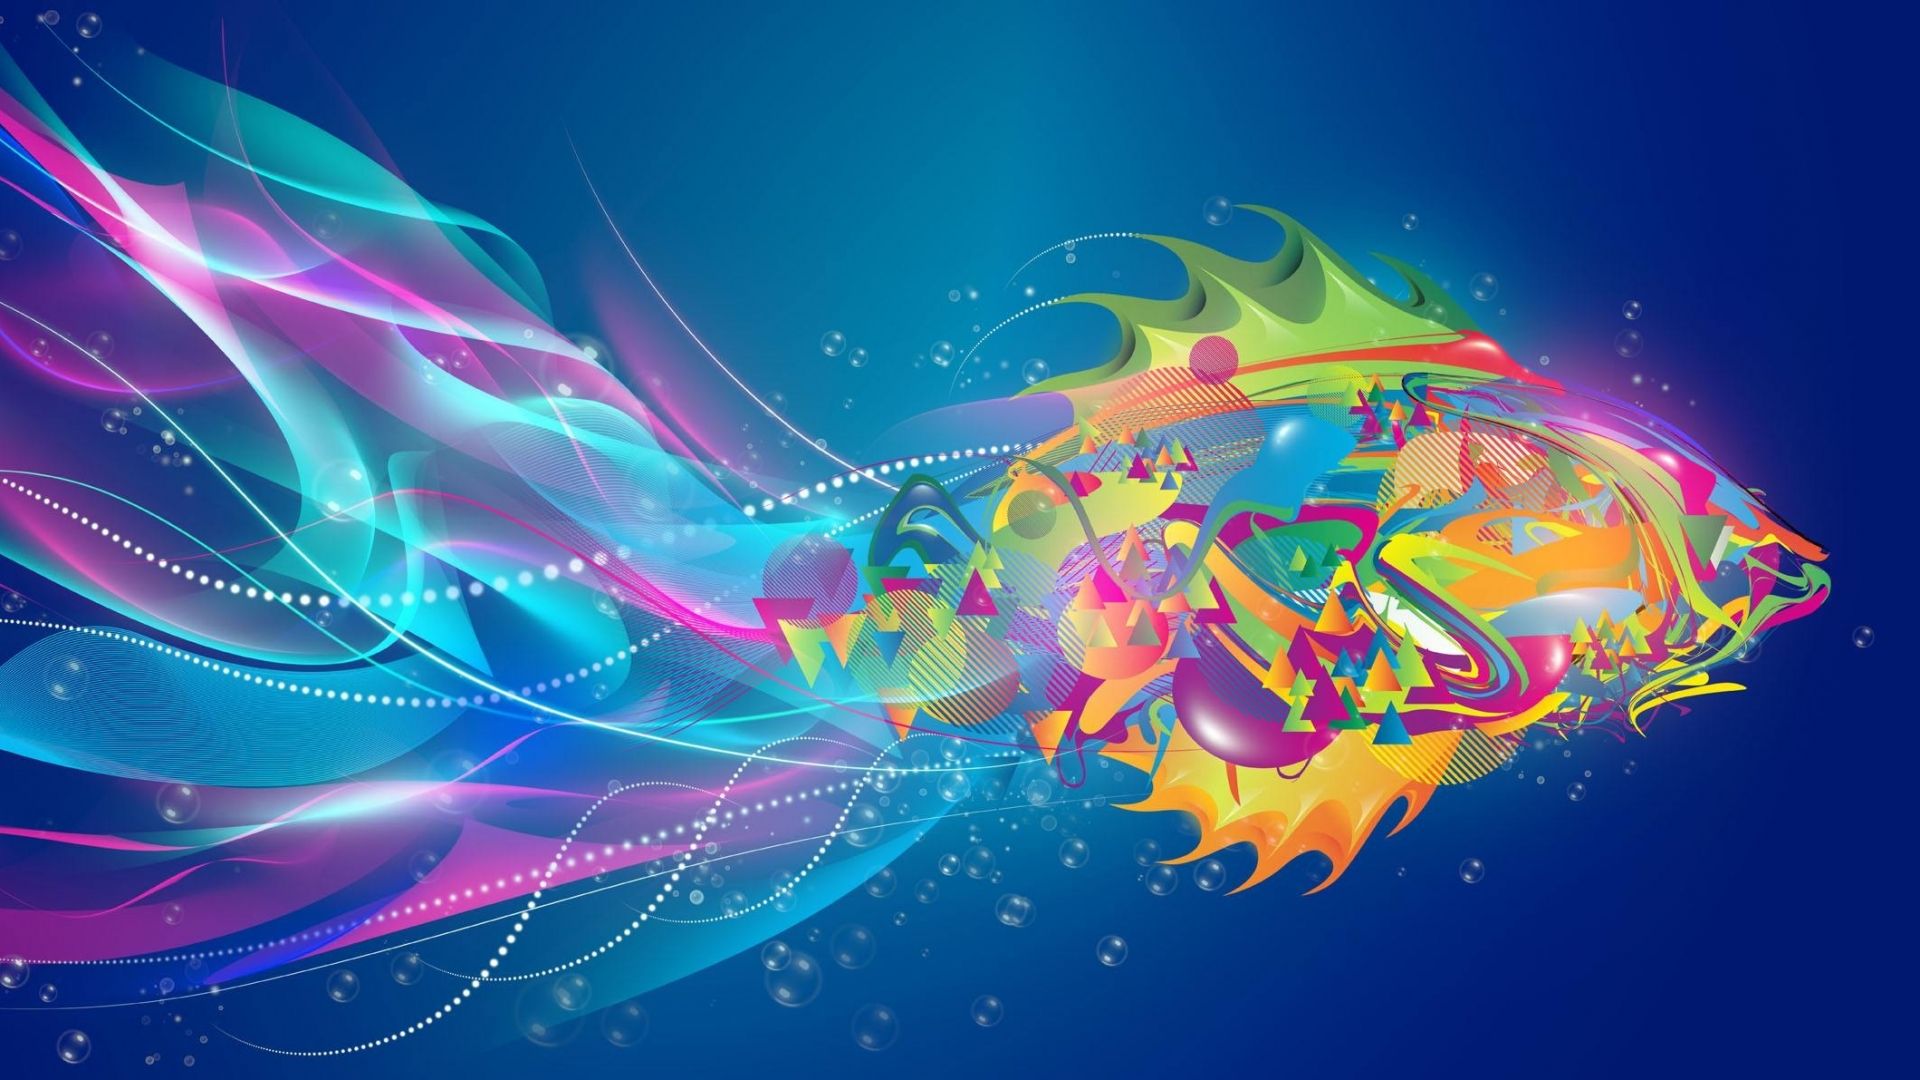 Abstract Fish Wallpapers